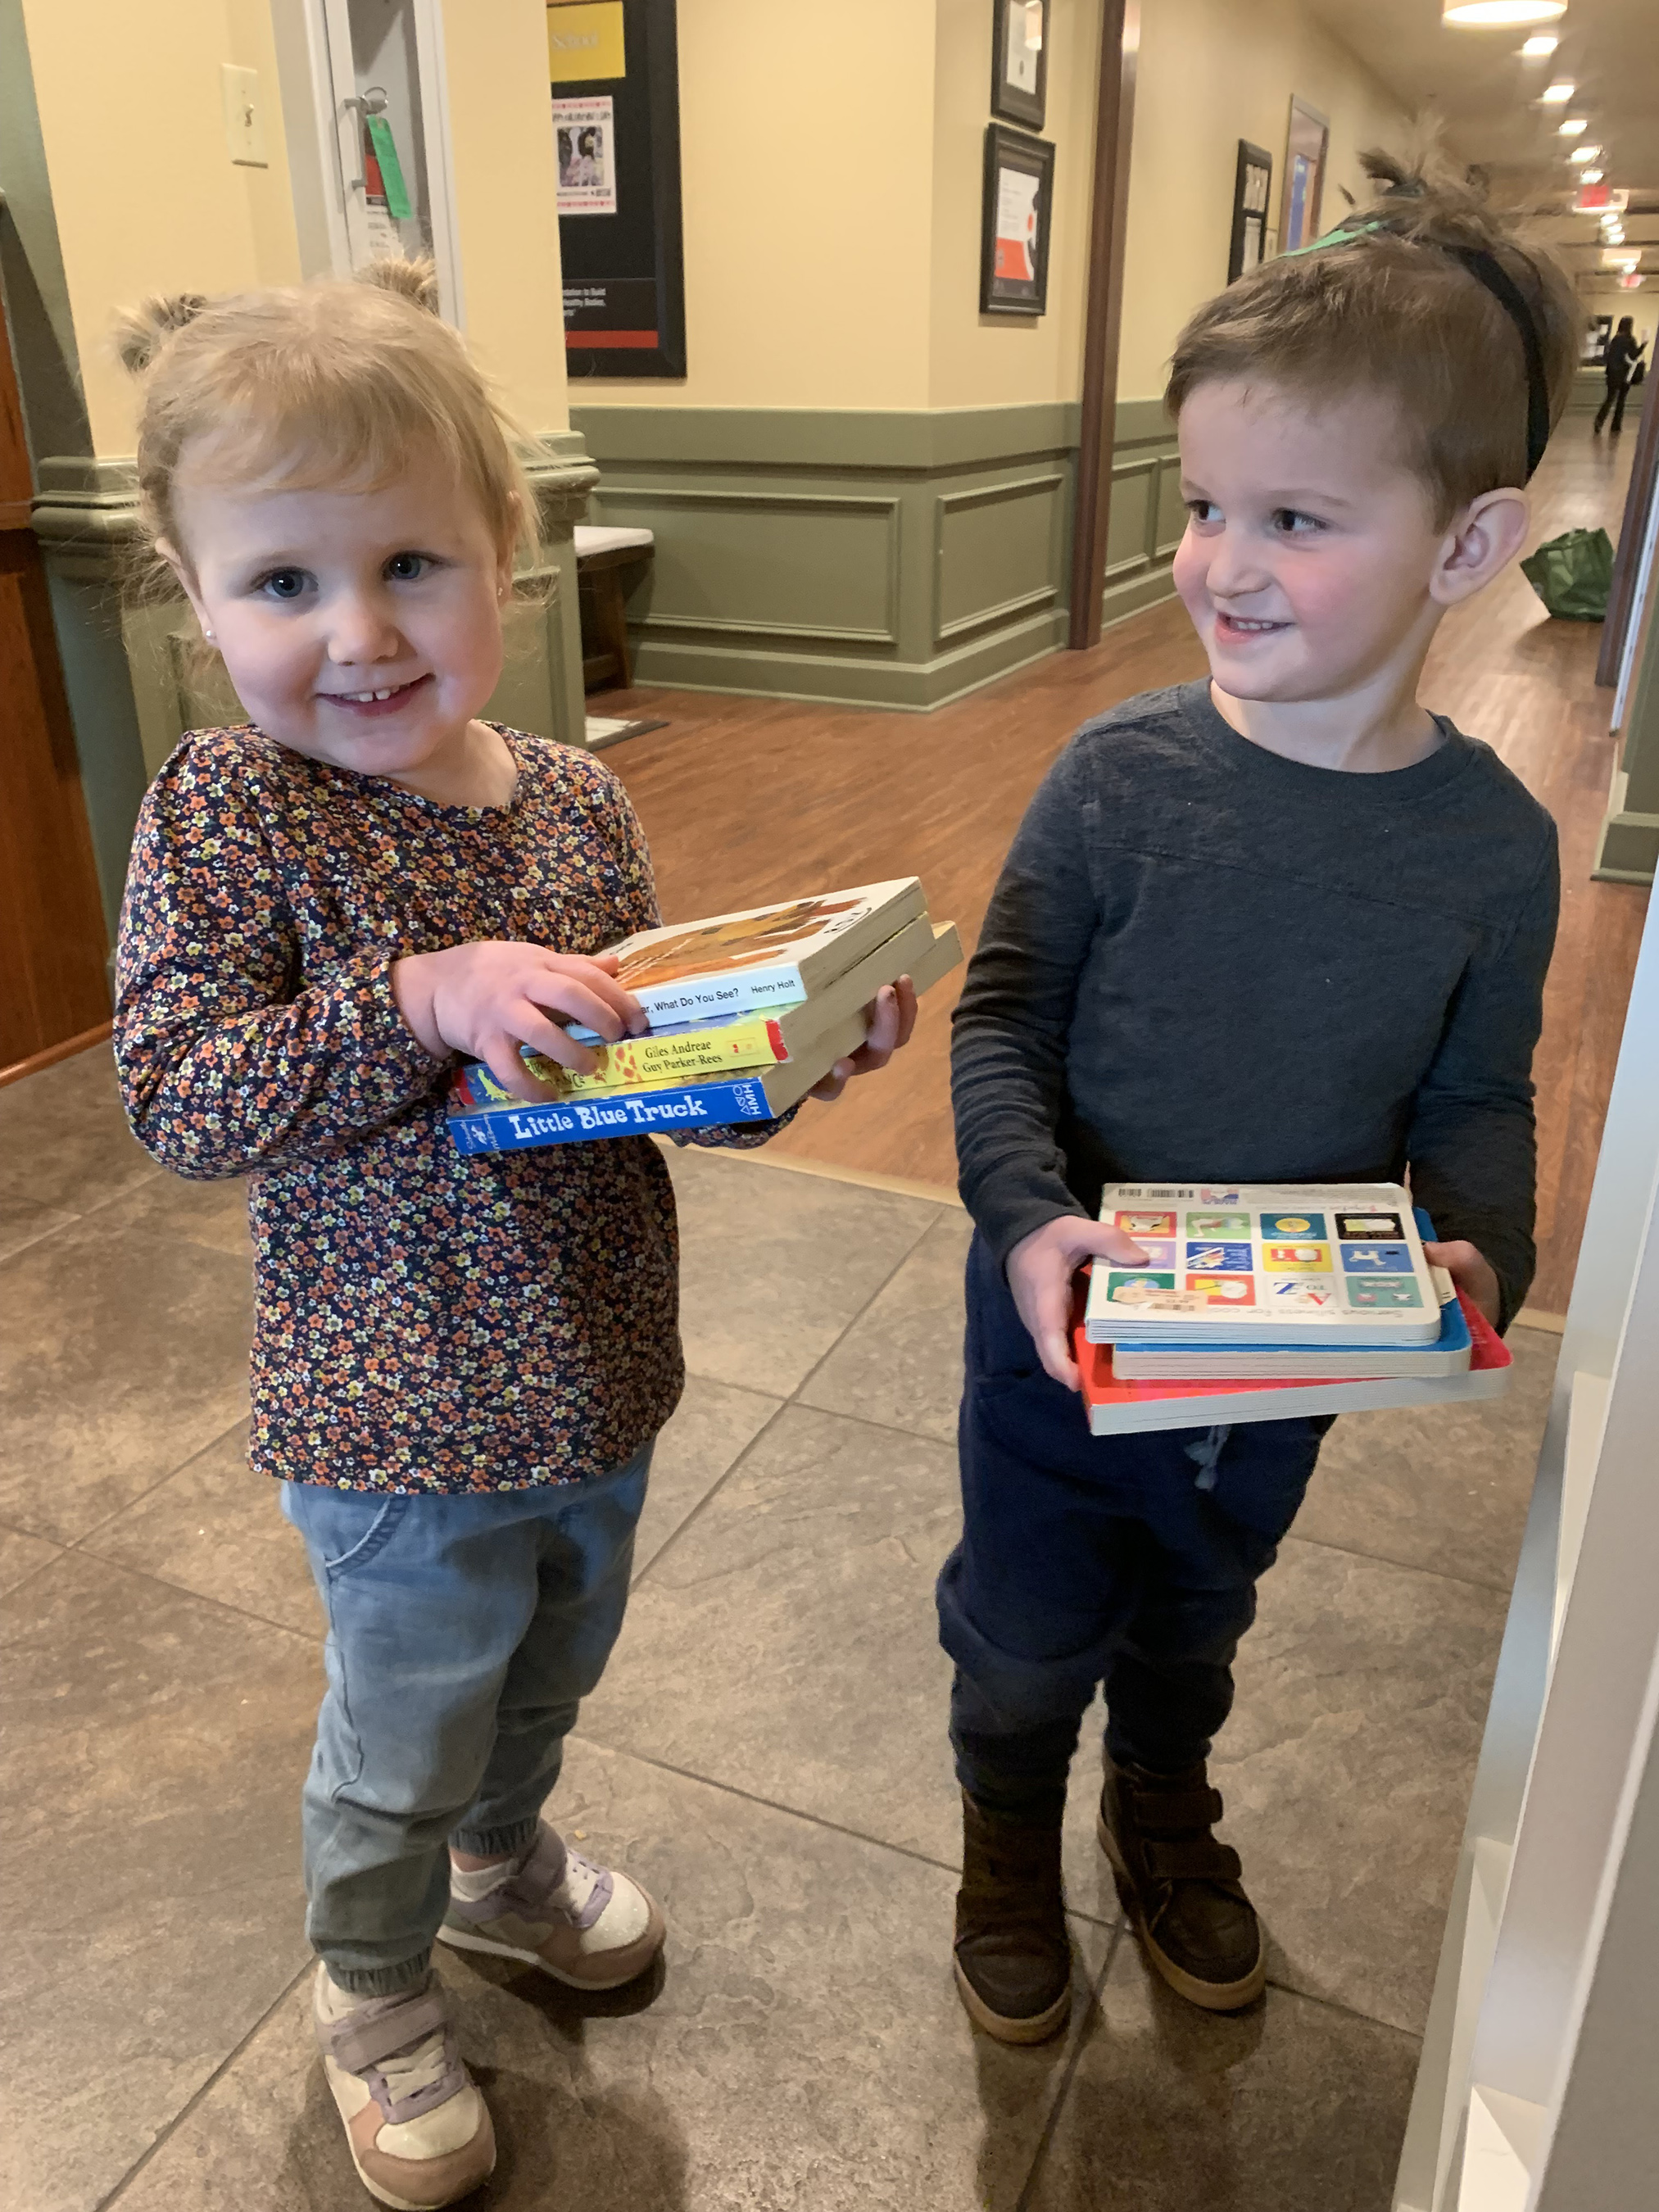 Primrose School of East Edmond (Edmond, OK) students donate books to their school’s Og’s Bountiful Book Drive benefiting multiple organizations in the community.